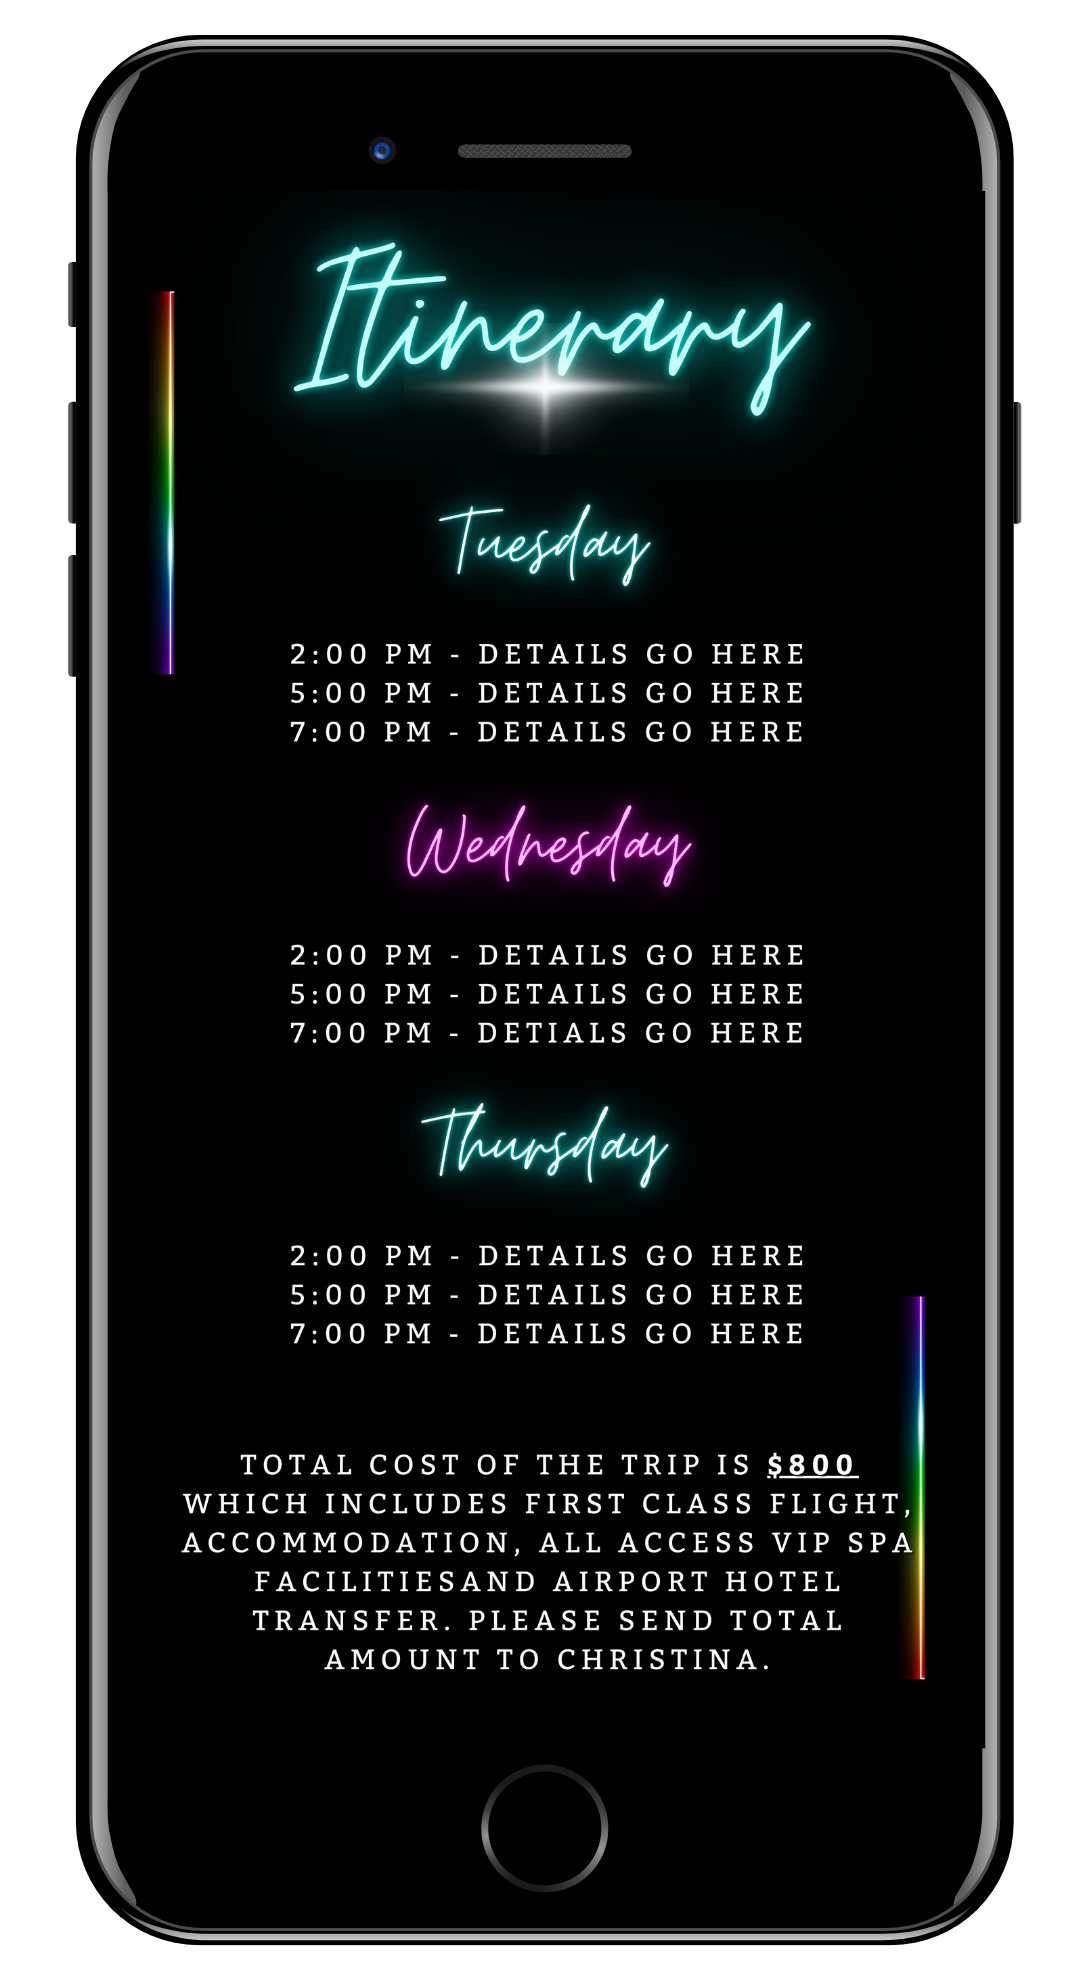 Miami Teal Pink Neon Getaway Party Evite customizable digital invitation template displayed on a smartphone screen.